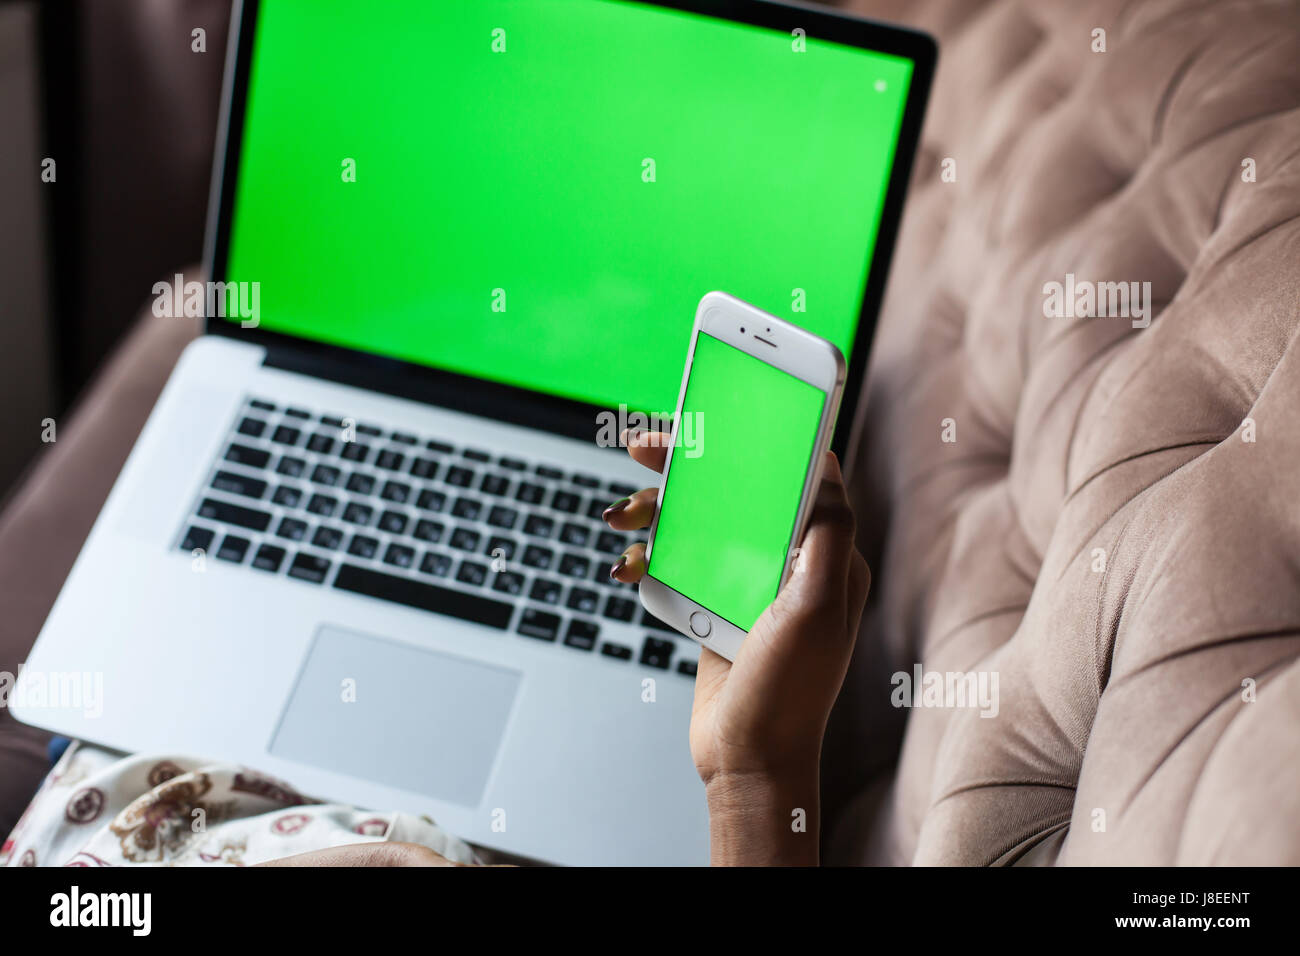 Close up shot of woman's hands holding phone and laptop with green screens. Stock Photo